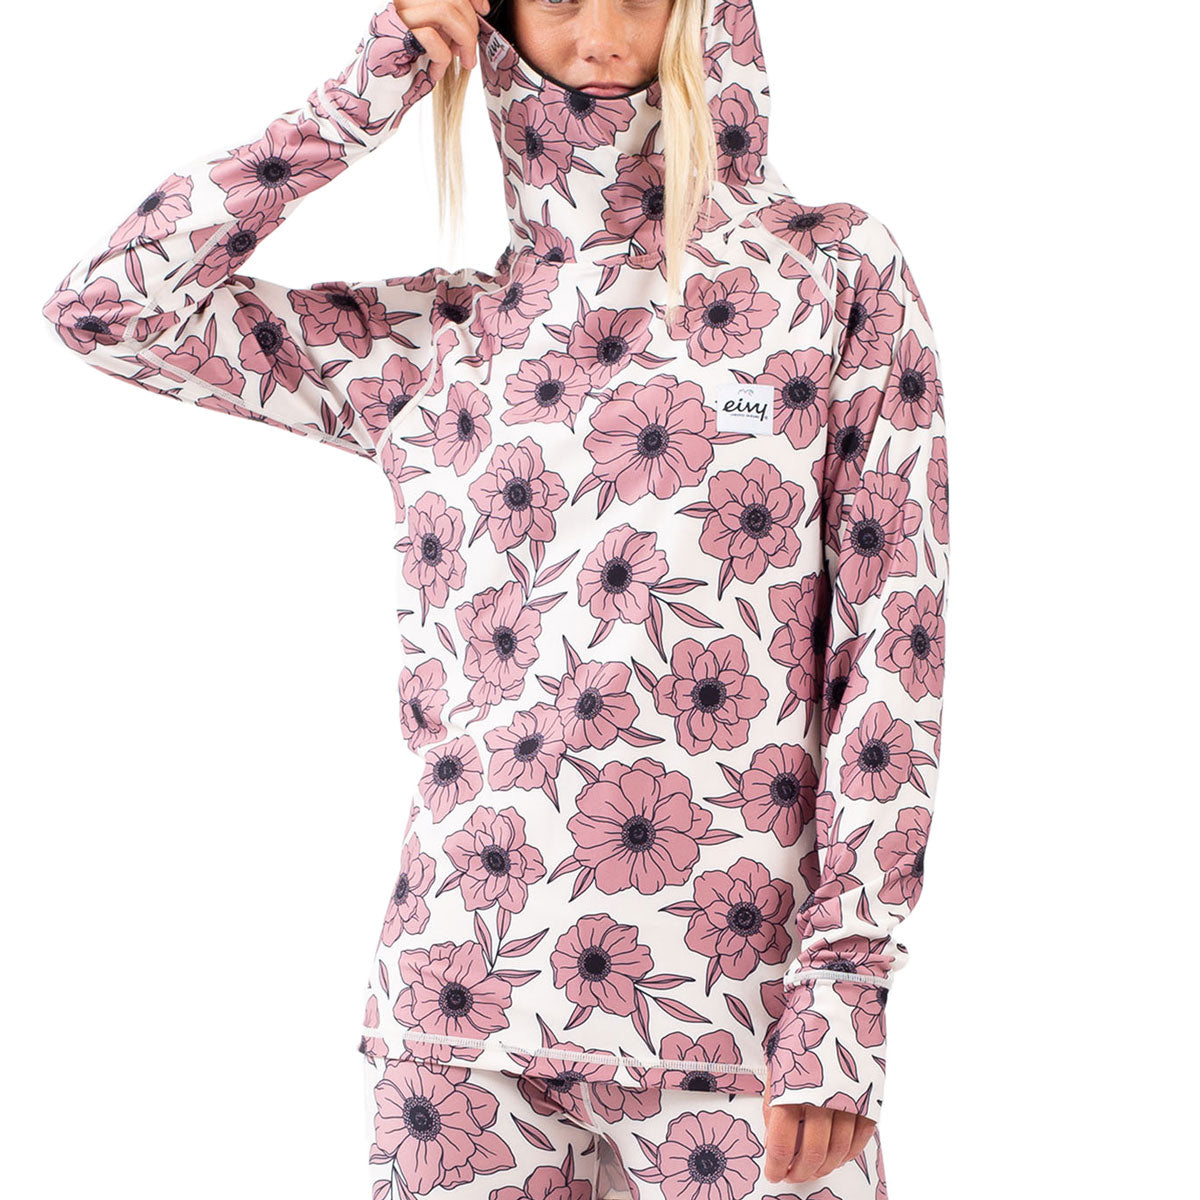 Eivy Icecold Hood Top Snowboard Base Layer - Wall Flowers image 1